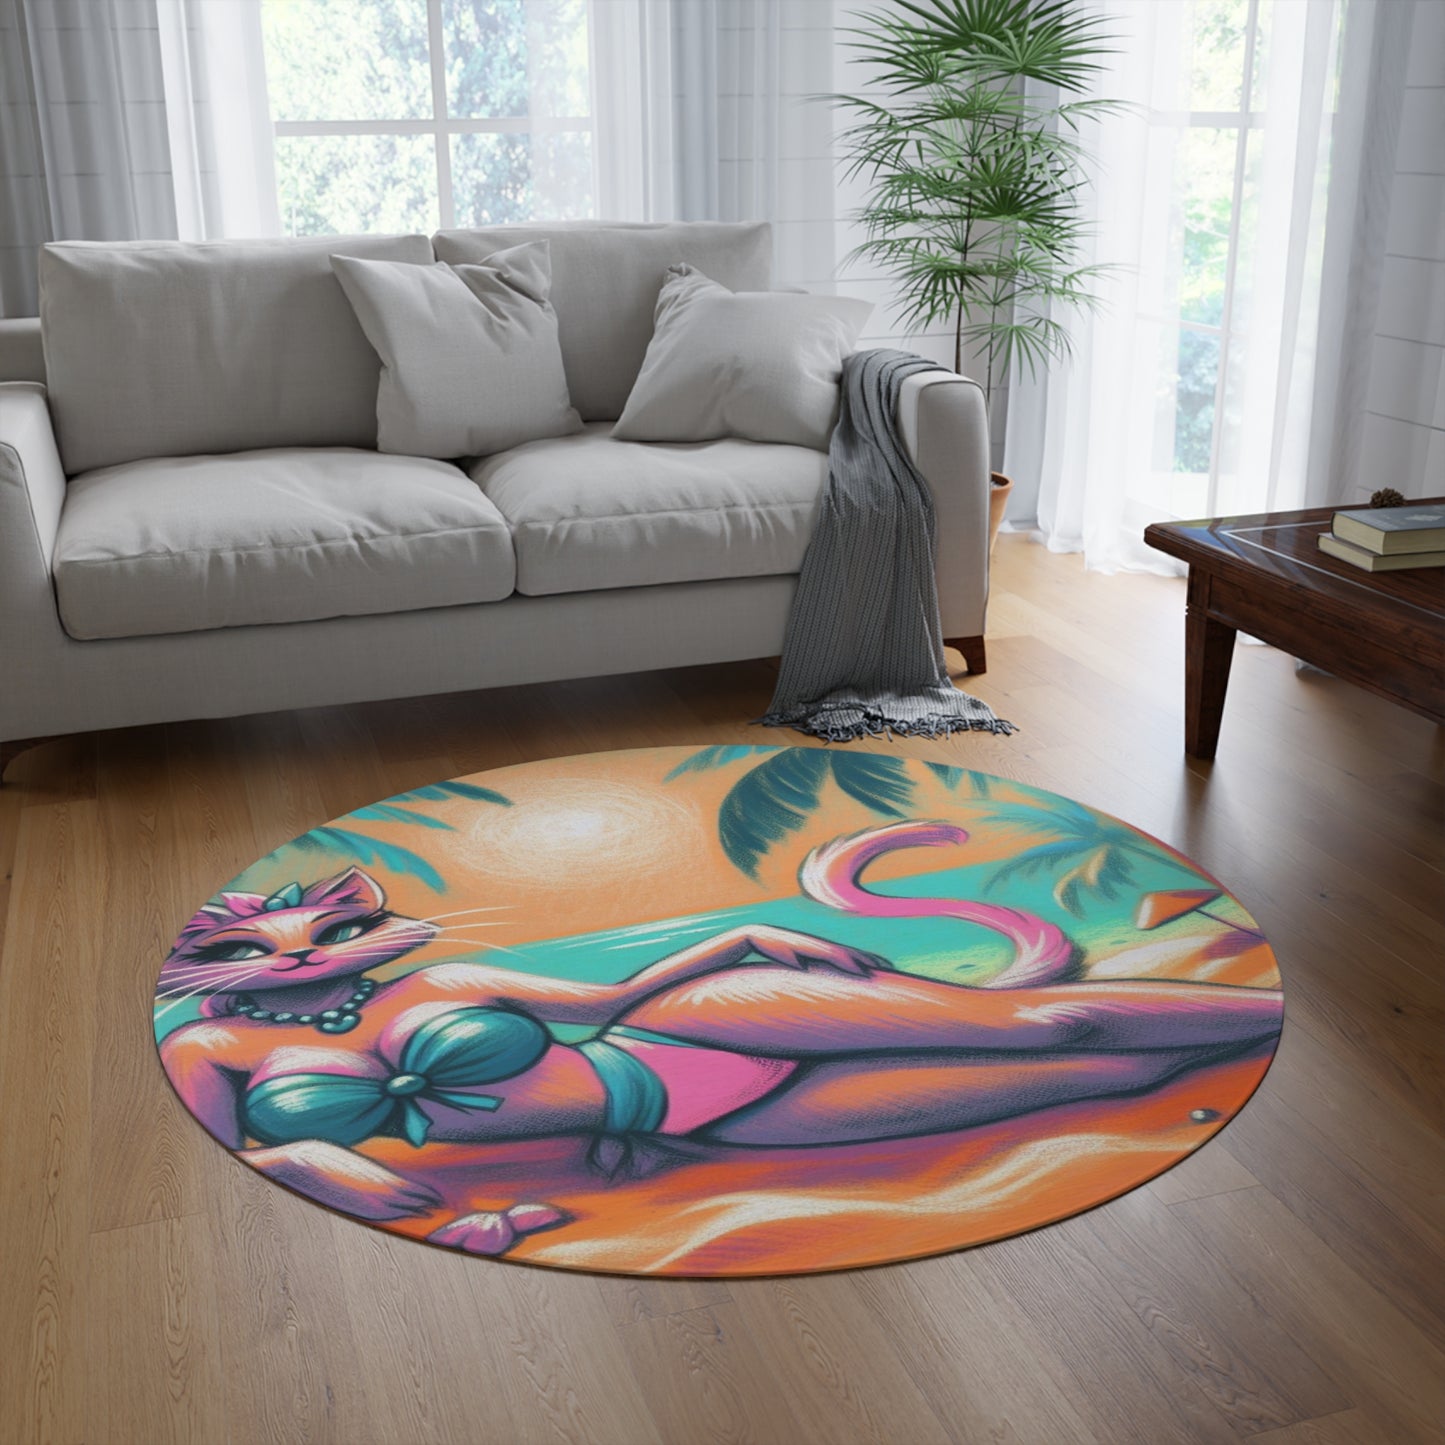 Aurora in Paradise: Tropical Kitty Sunset Round Rug